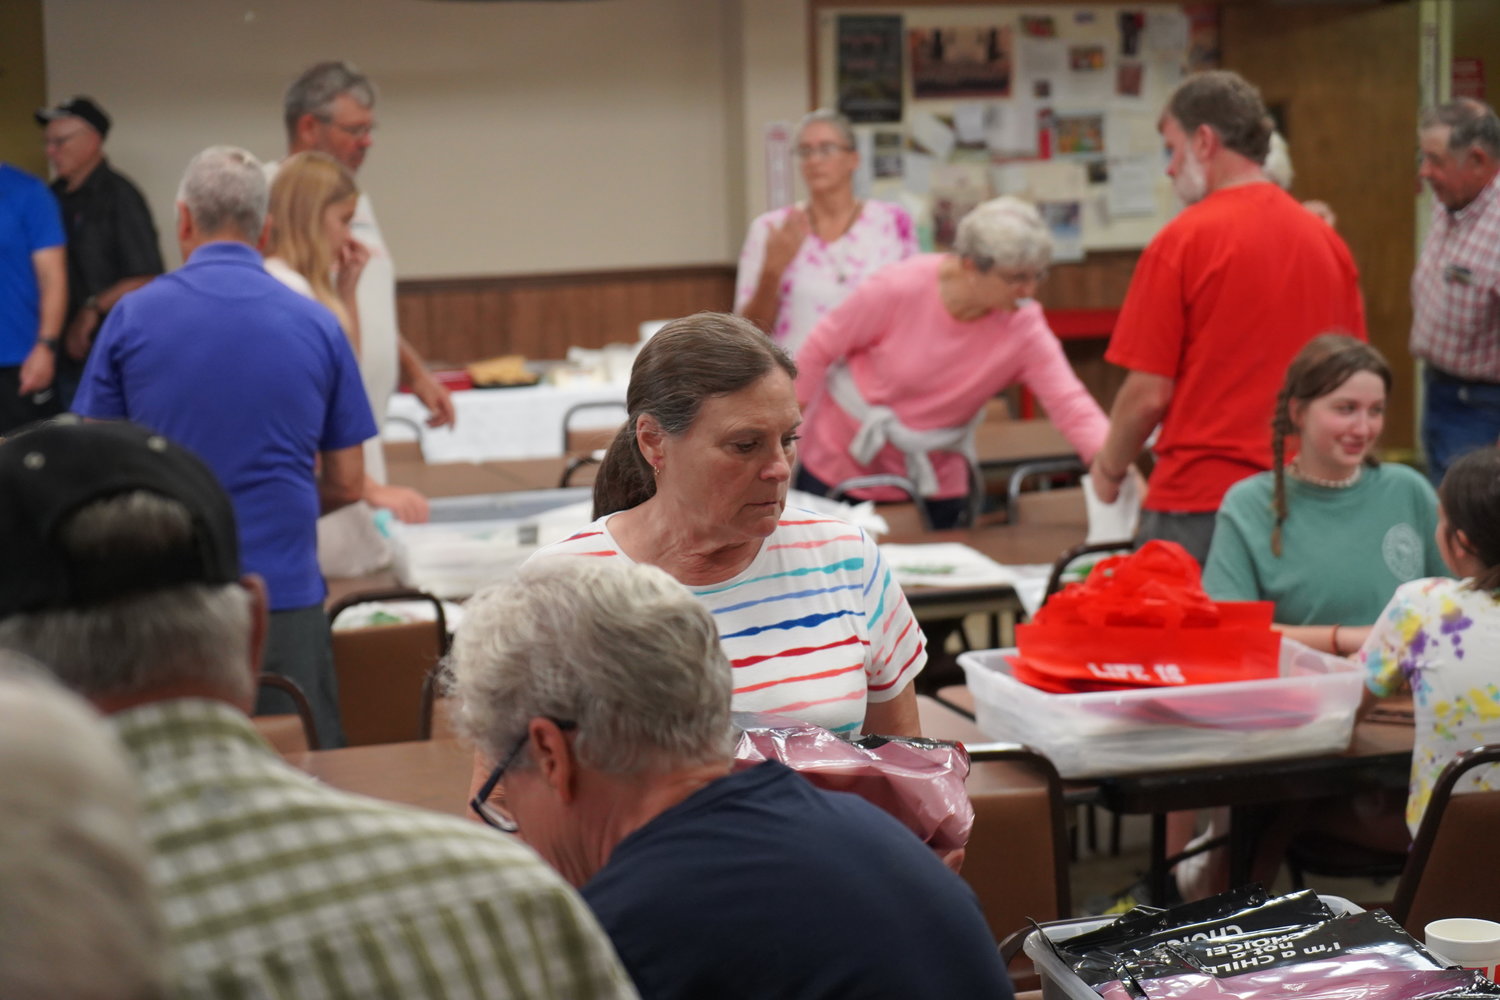 Volunteers gather in Knights of Columbus Council 831’s hall in Sedalia on Aug. 3, to fill 3,000 bags with informational materials for the 48th annual Right to Life booth at the Missouri State Fair in Sedalia.